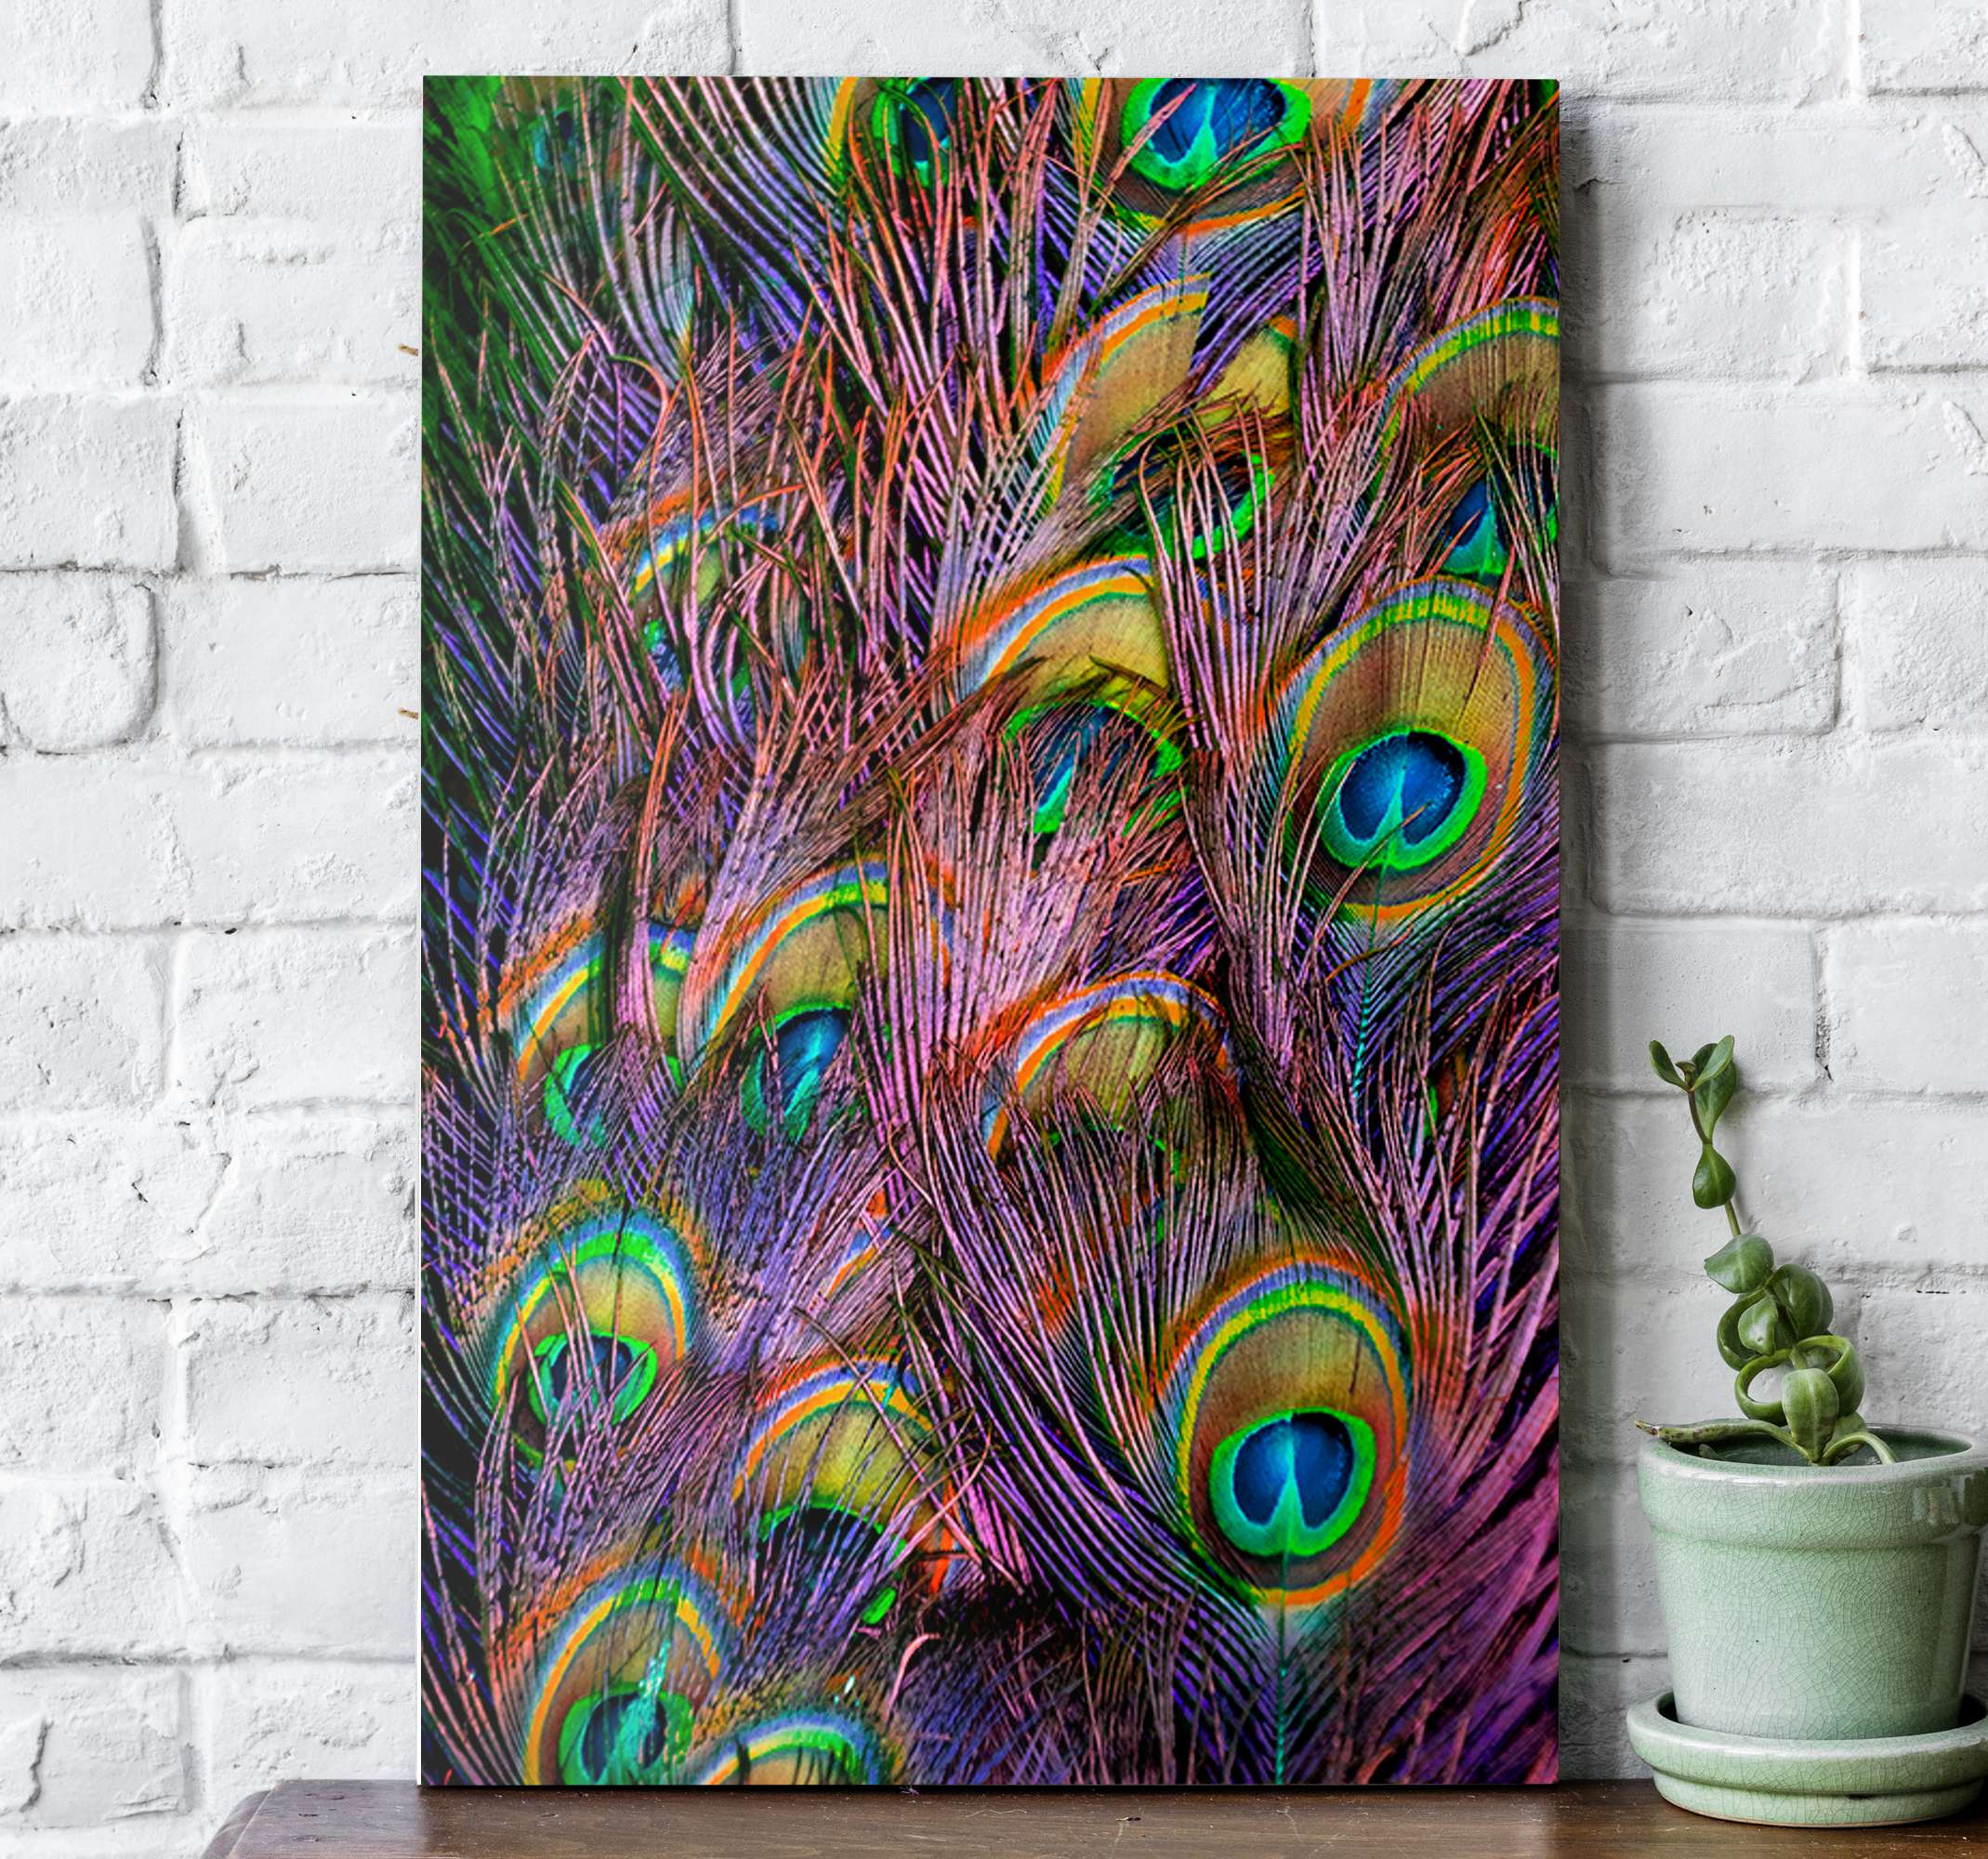 Peacock Wall Art Peacock Golden Tree Pictures Wall Decor Colorful Bird  Peacock Canvas Painting Modern Decoration Artwork for Bathroom Living Room